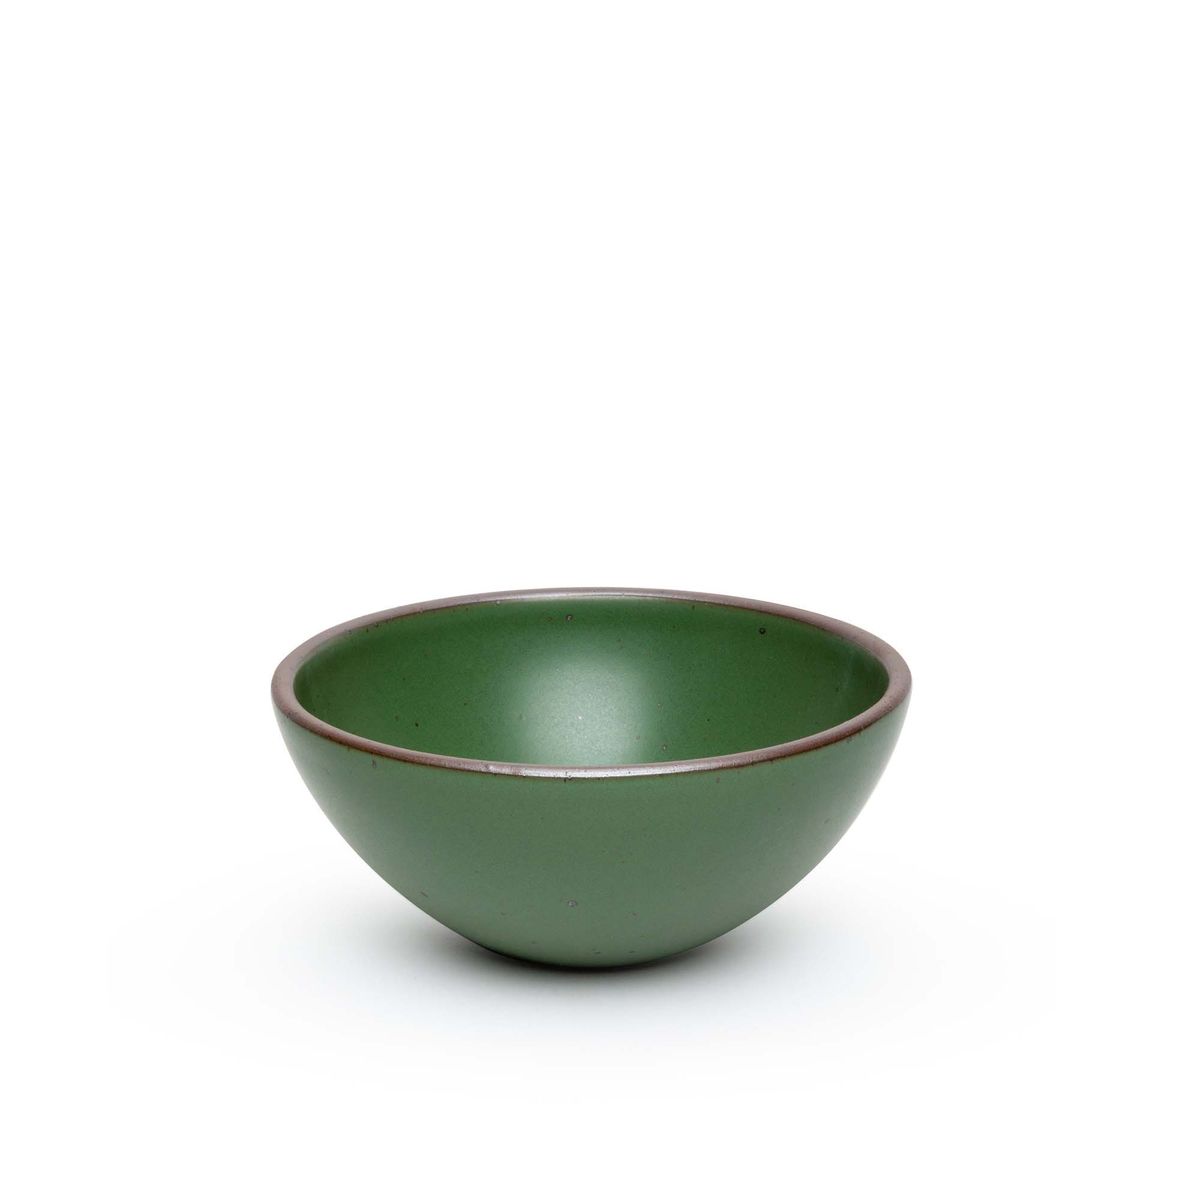 A medium rounded ceramic bowl in a deep, verdant green color featuring iron speckles and an unglazed rim